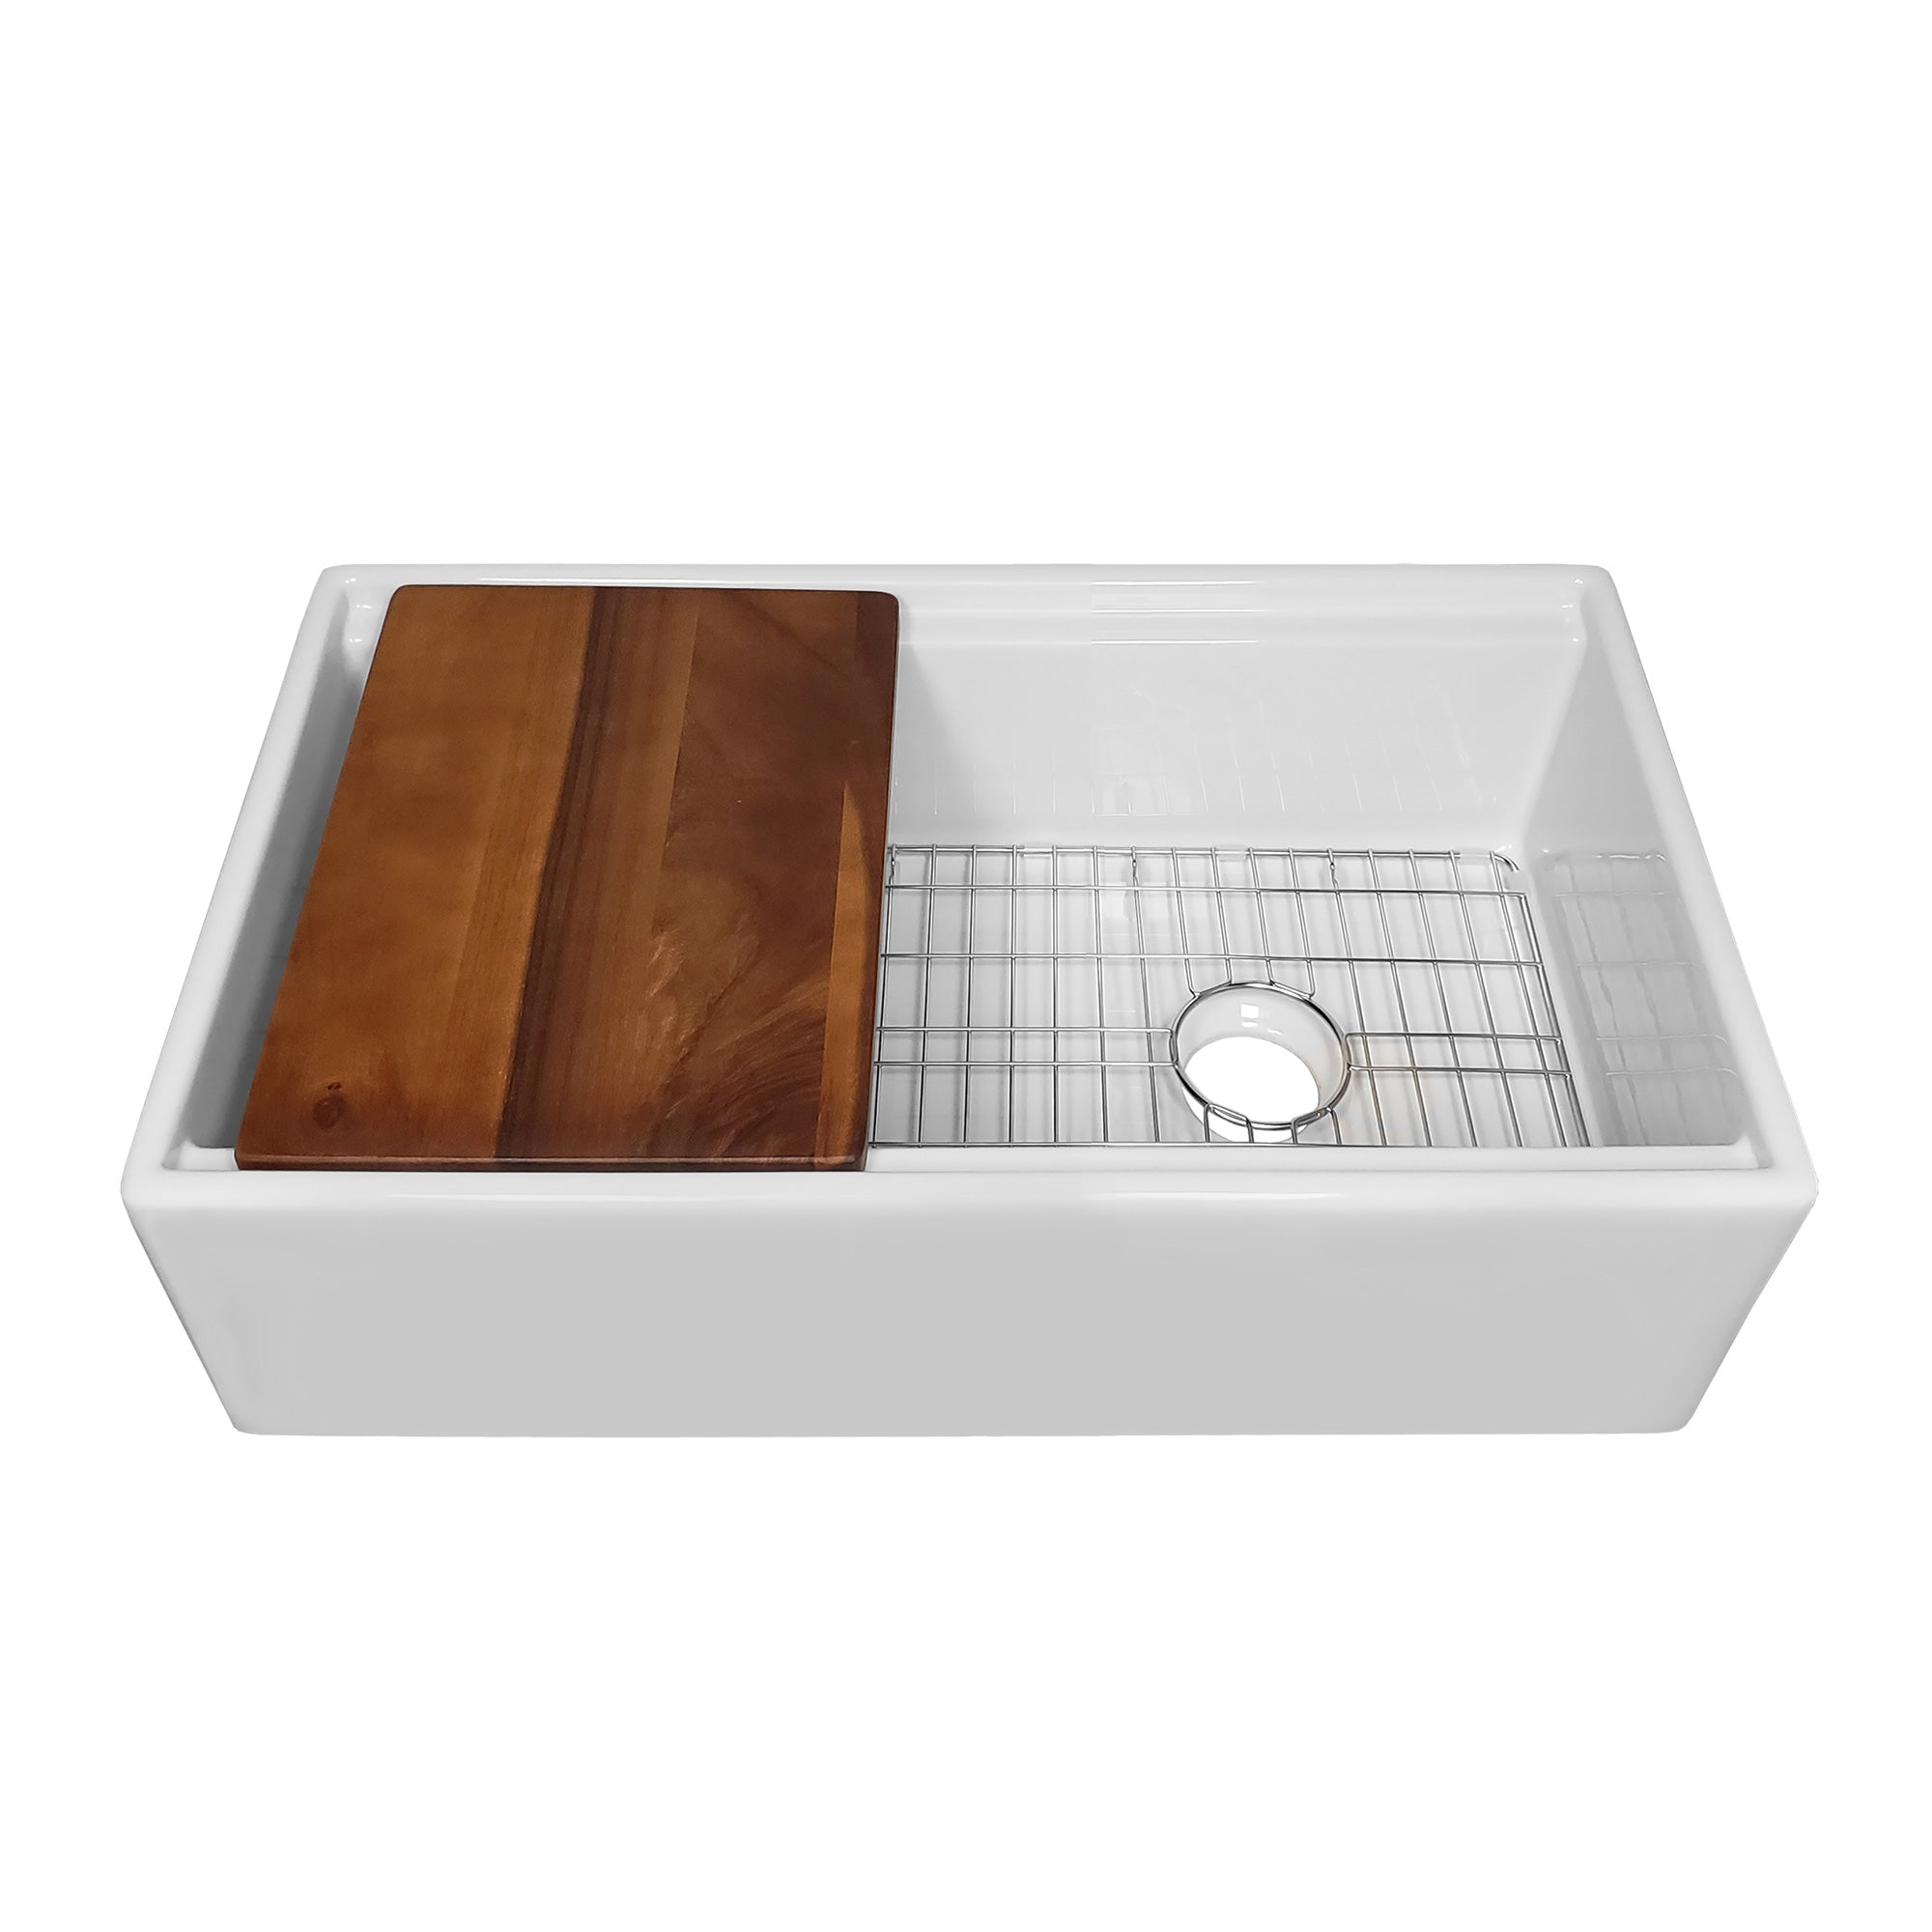 Whitehaus Collection 30" Reversible Single Bowl Fireclay Sink Set with a Smooth Front Apron, Walnut Wood Cutting Board and Stainless Steel Grid